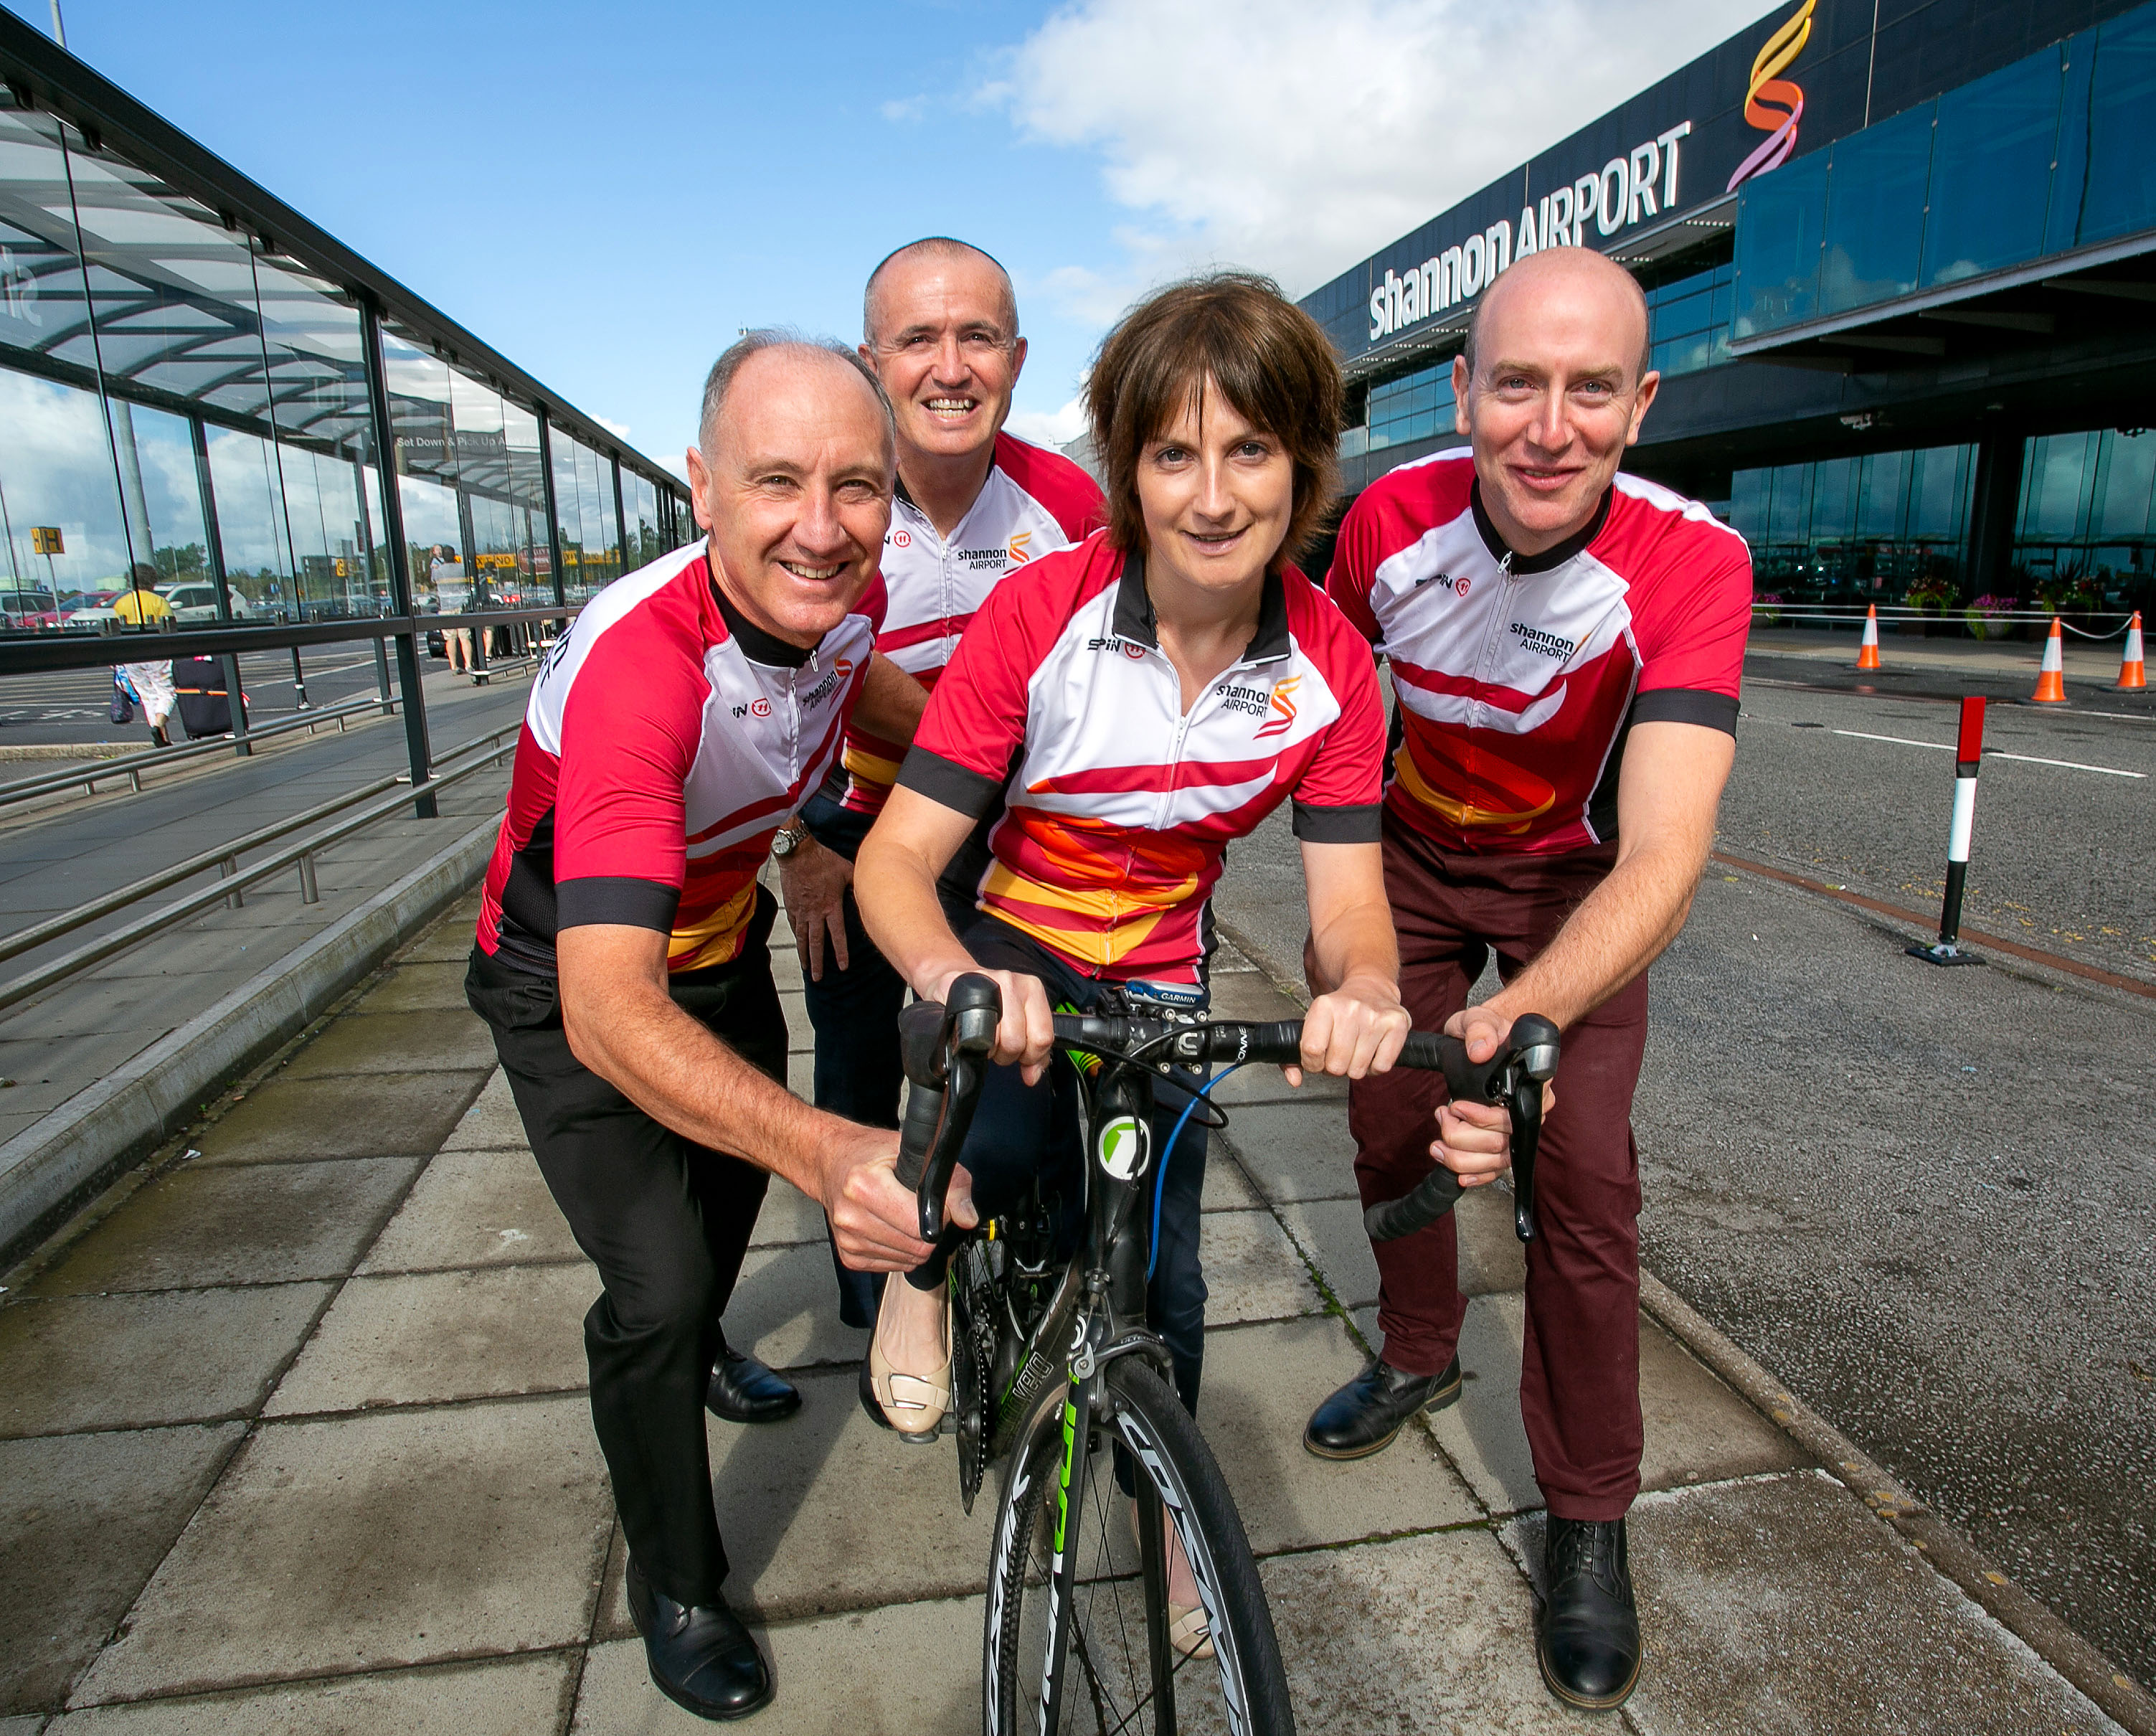 Shannon Group Charity Cycle